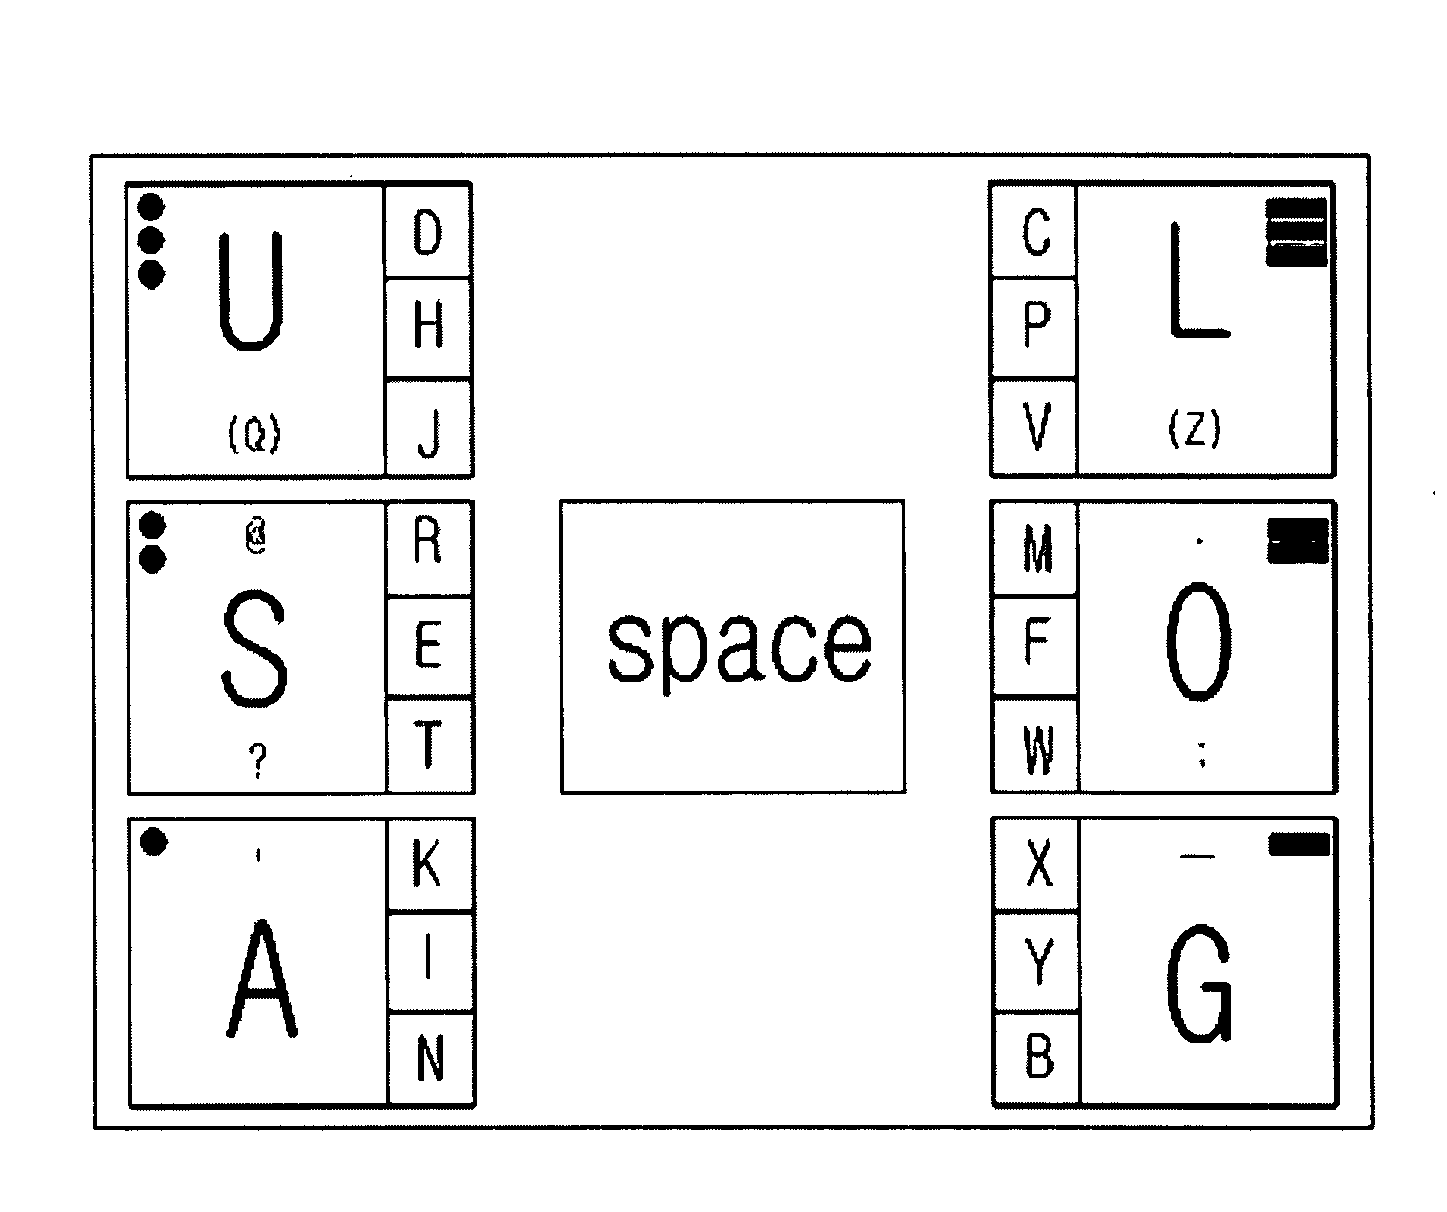 Letter input structure using morse code and input method of the same